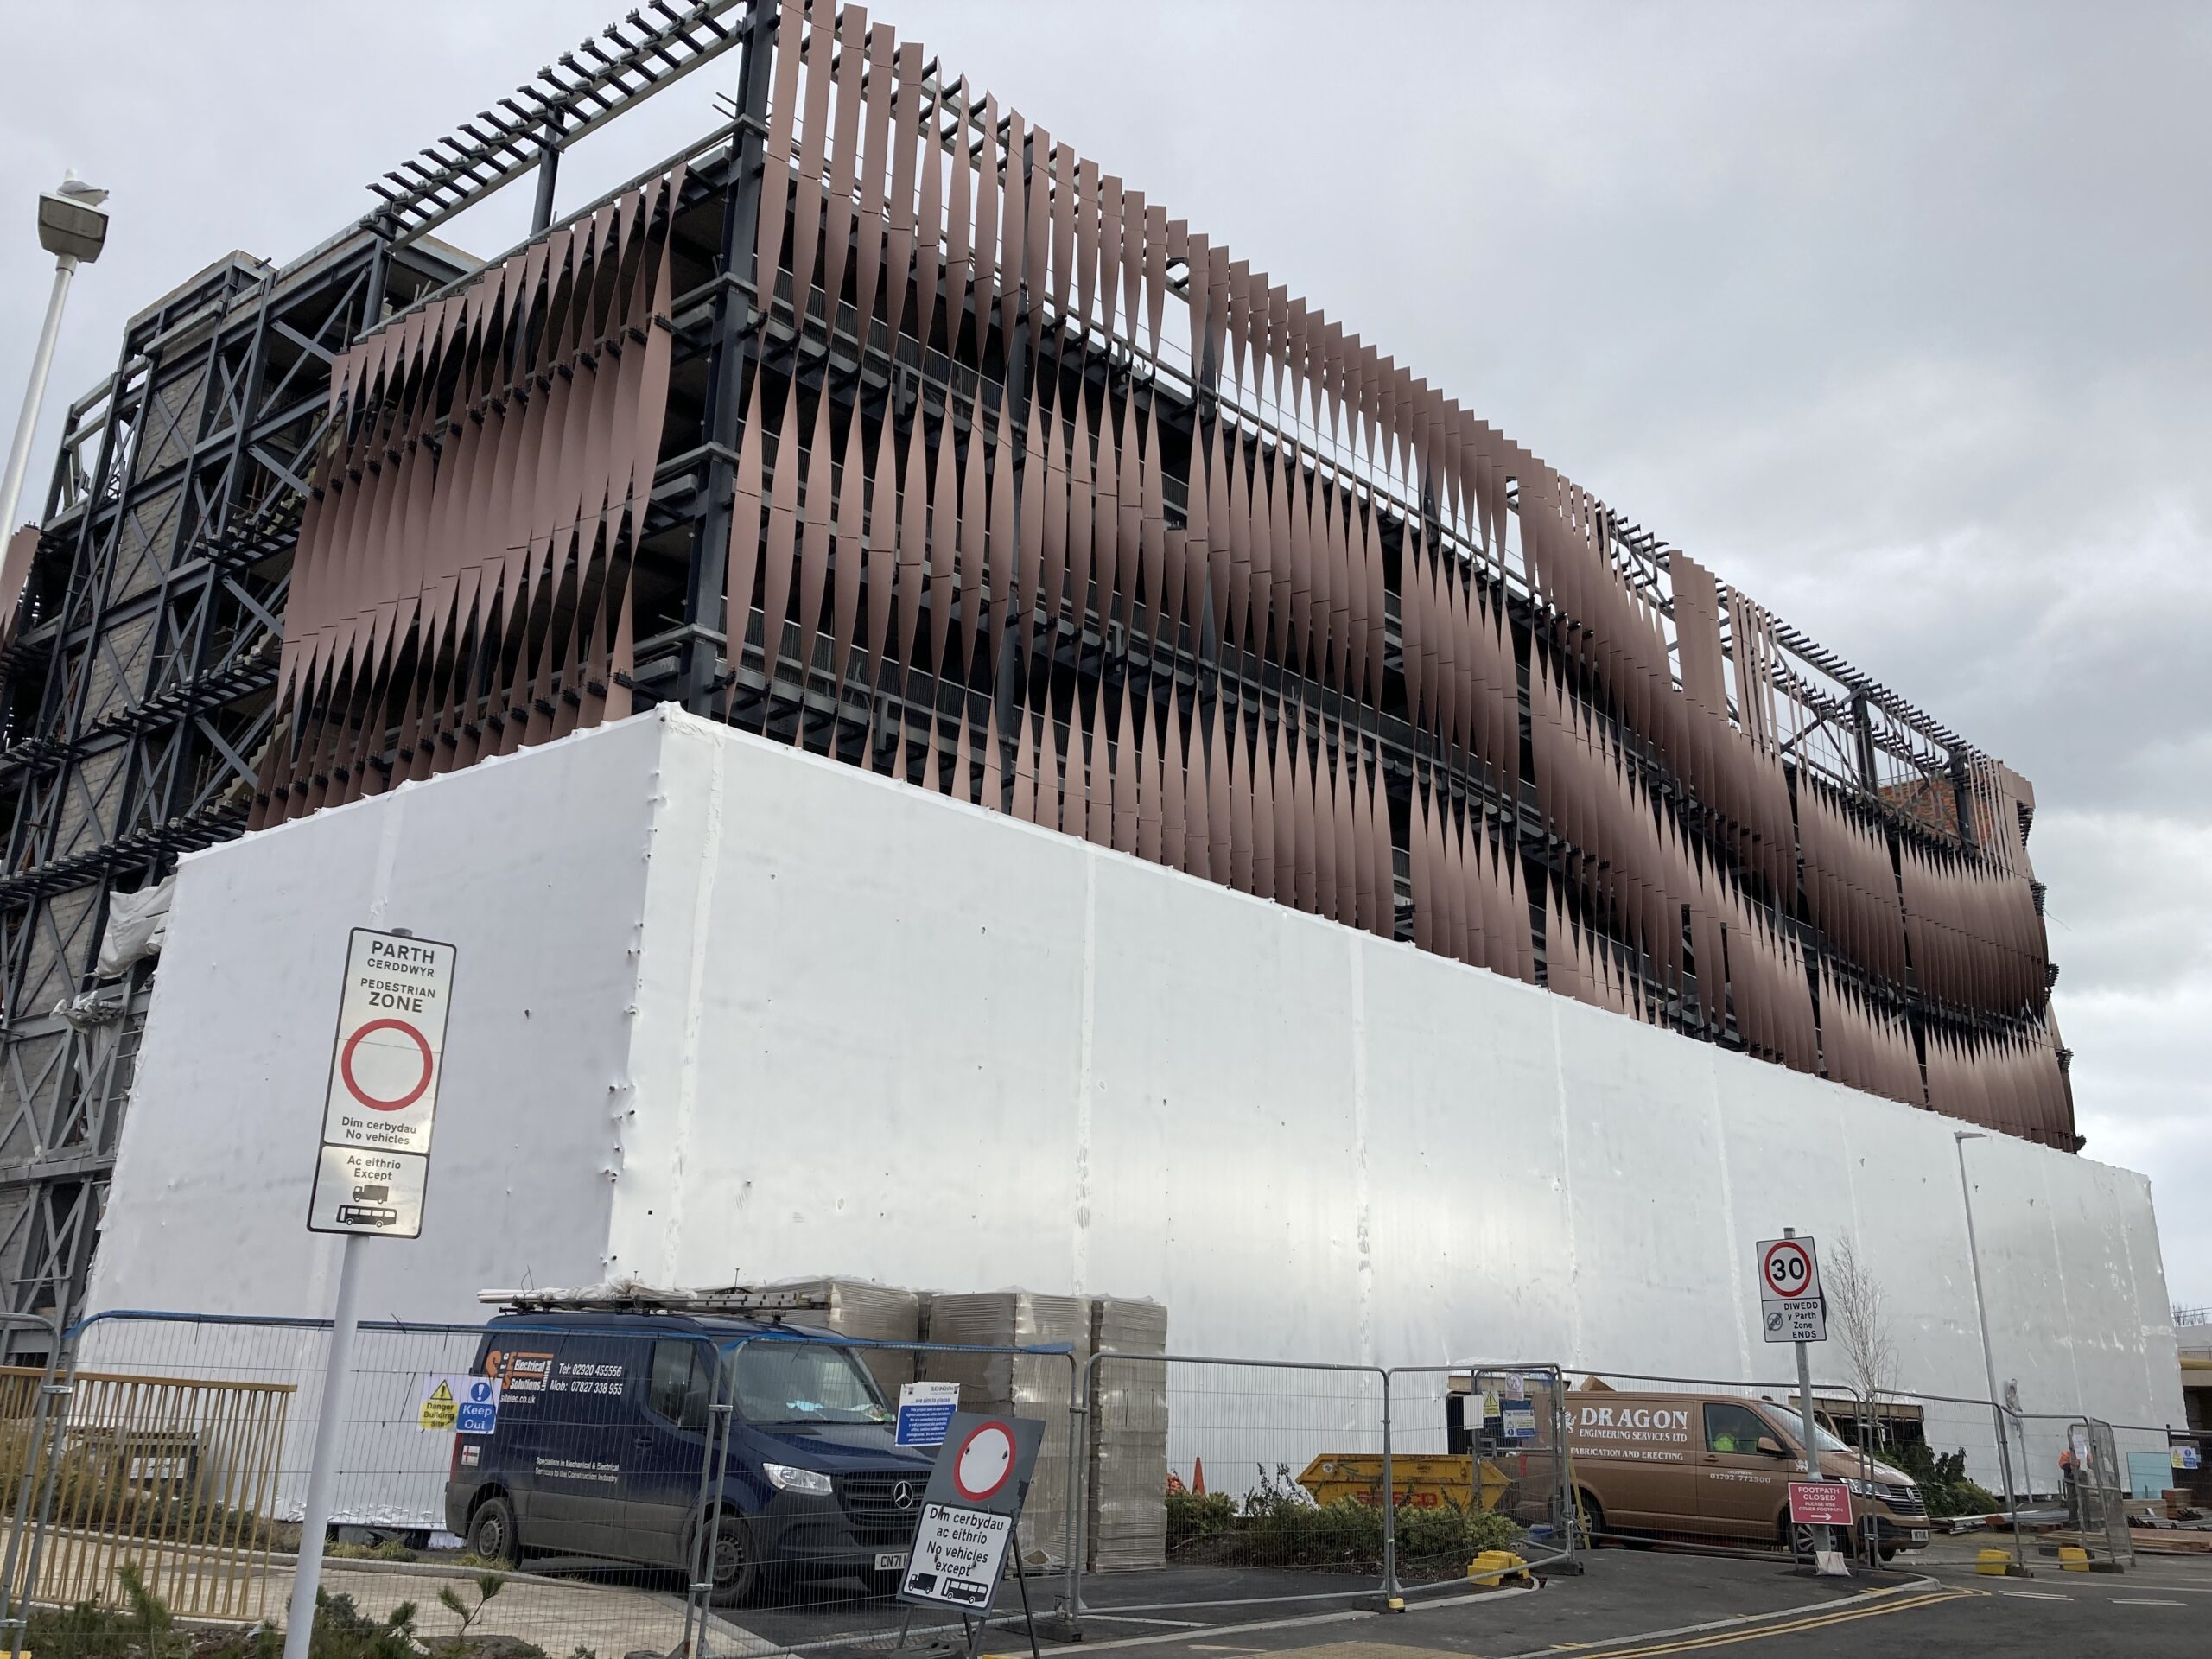 Defective paintwork on Swansea’s newest multi-story carpark undergoing removal and reapplication